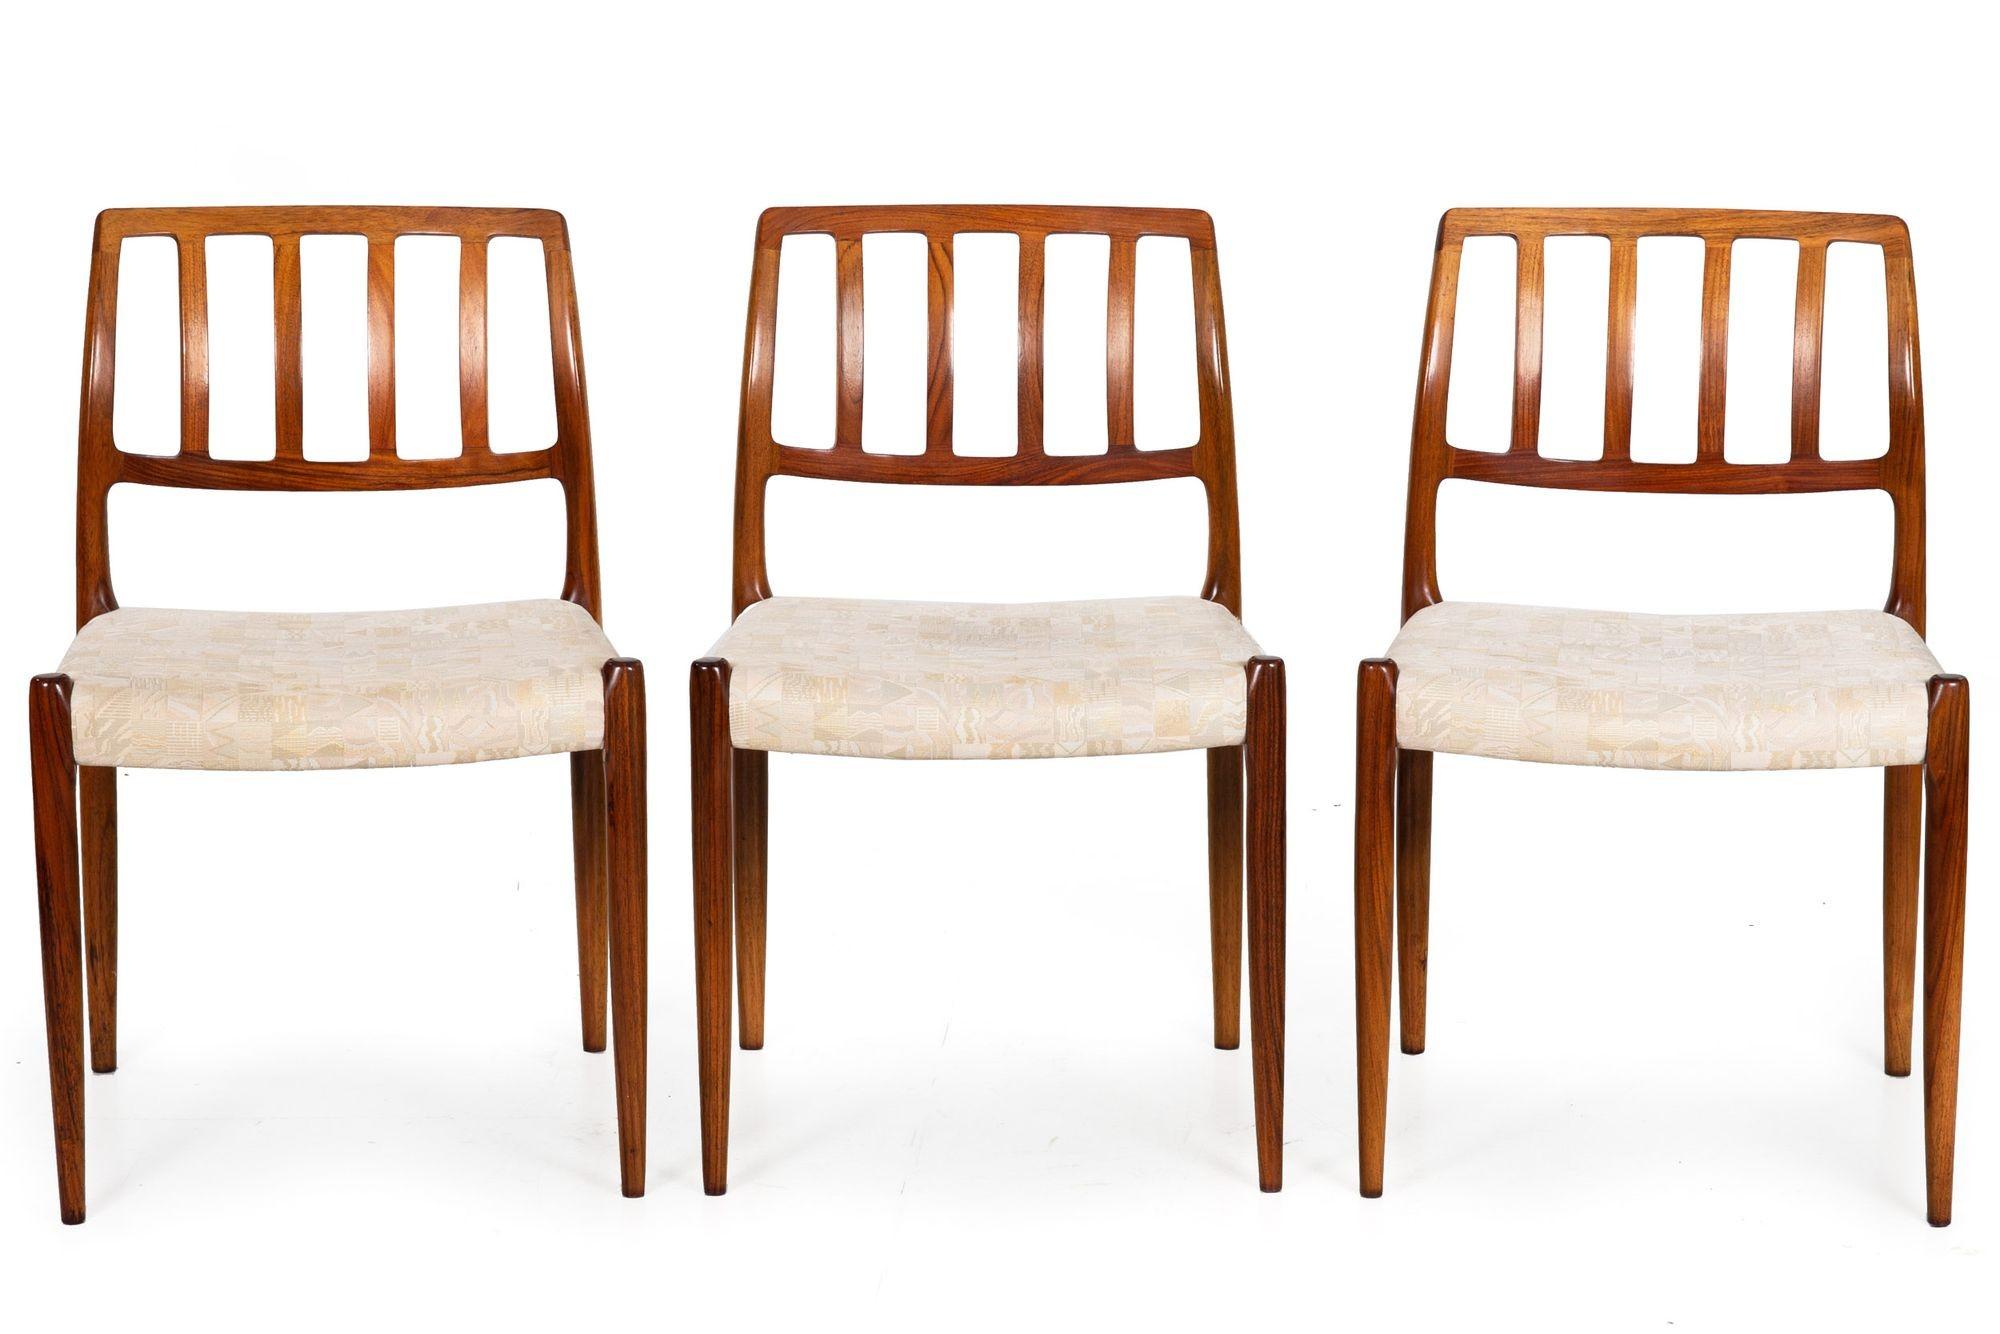 SET OF 6 MODEL 83 ROSEWOOD DINING CHAIRS BY J.L. MØLLER
Denmark  branded to inside of chair frame with J.L. MØLLER marking
Item # 212MRP15A 

A wonderful set of original J.L. Møller model 83 dining chairs from Denmark circa the third quarter of the